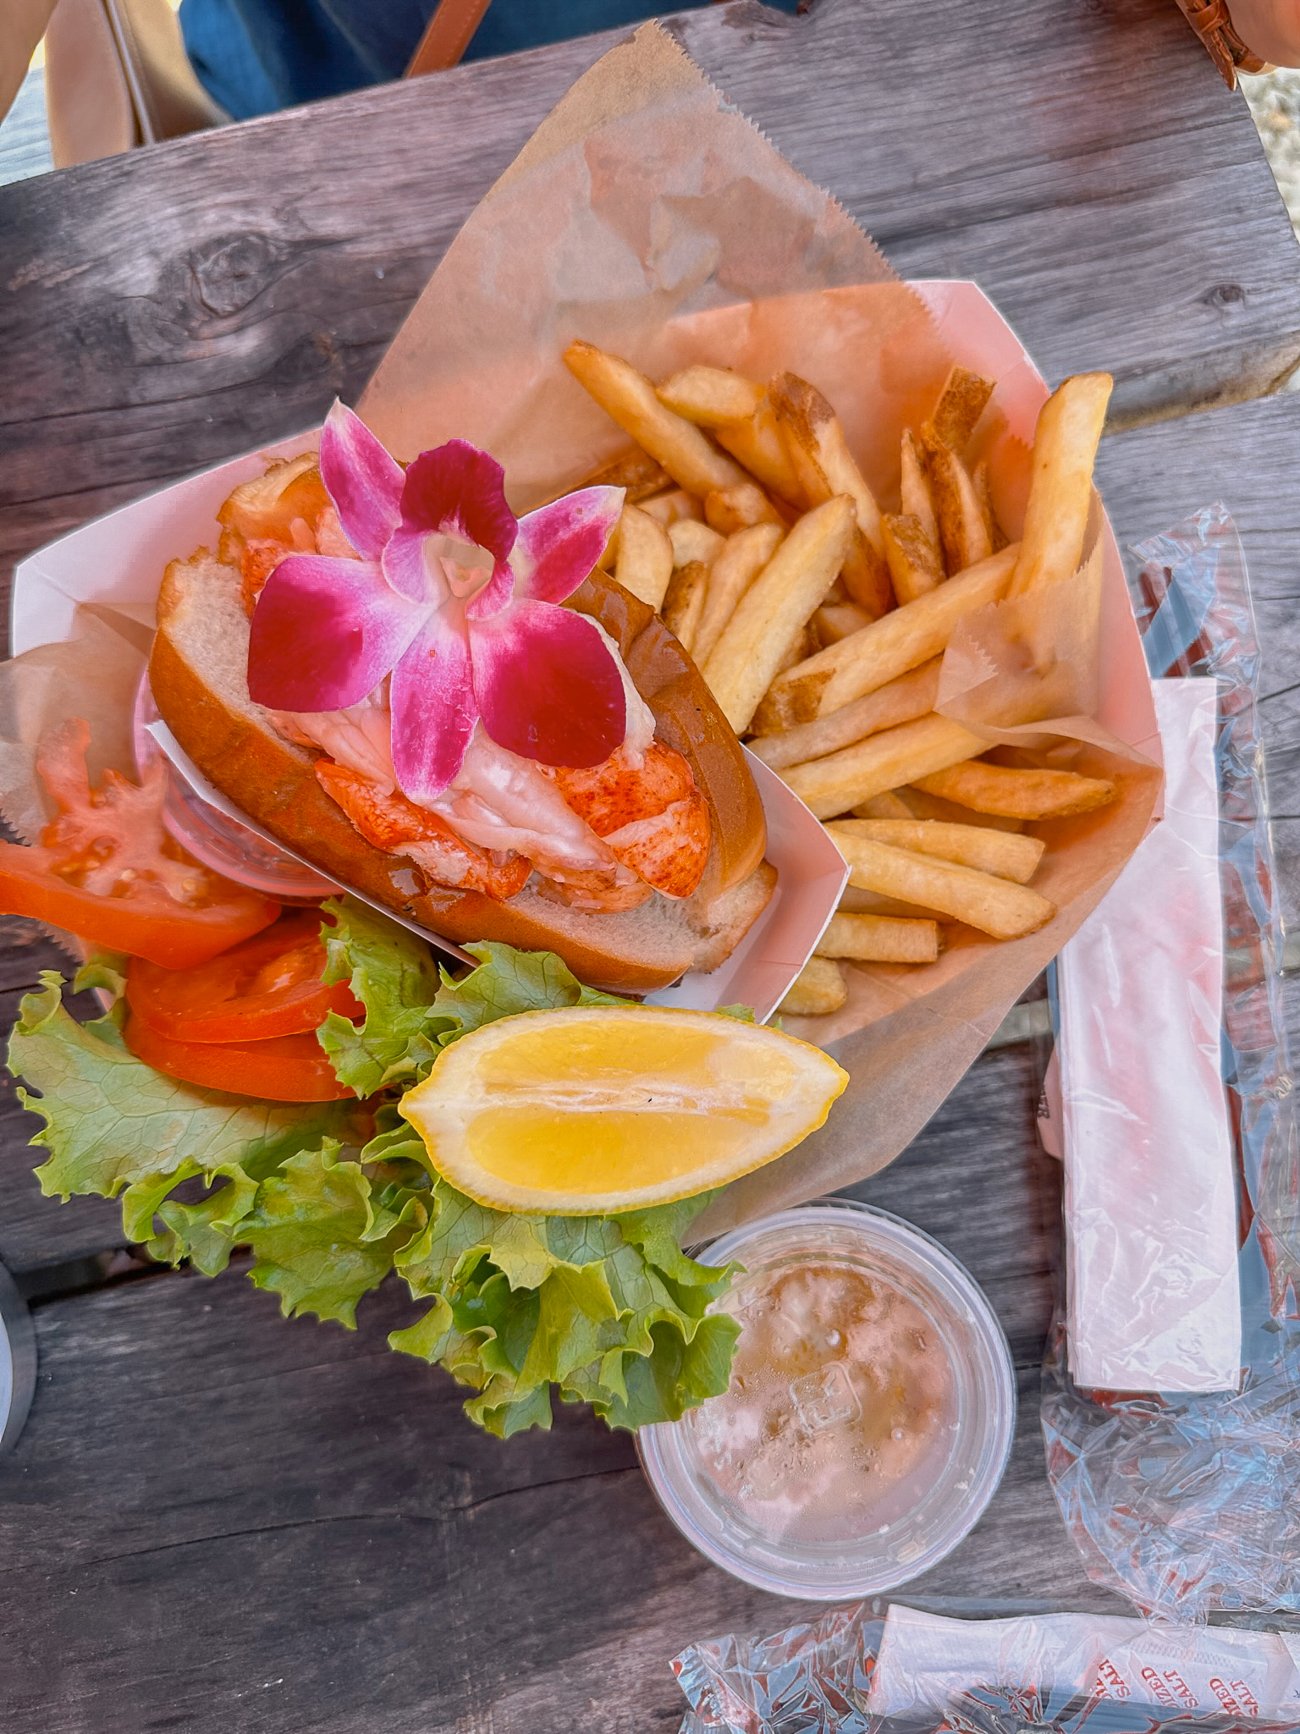 Lobster roll at Shannon's Unshelled in Boothbay Harbor